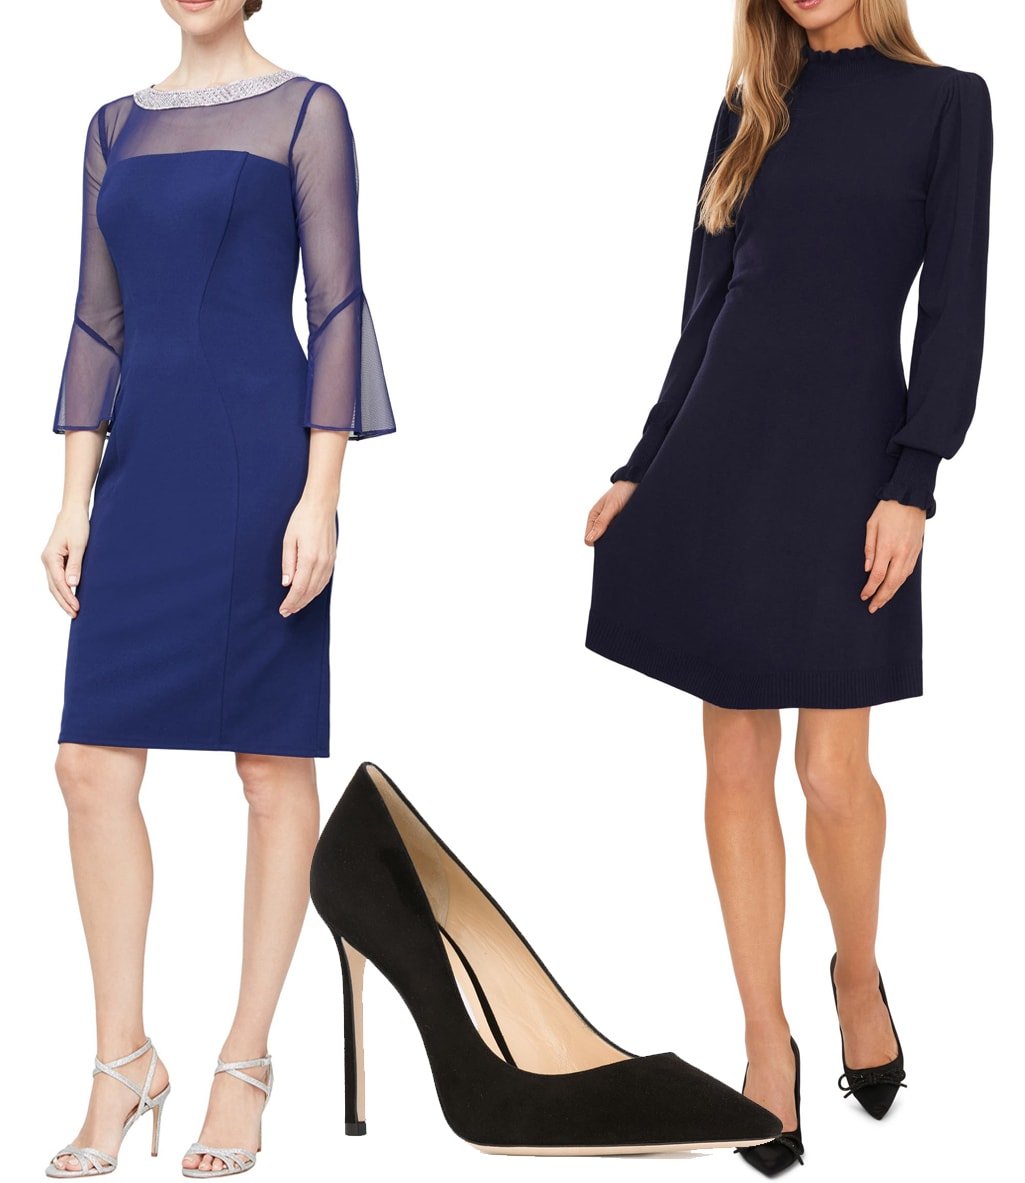 Black shoes don't often go well with dresses in lighter shades of navy